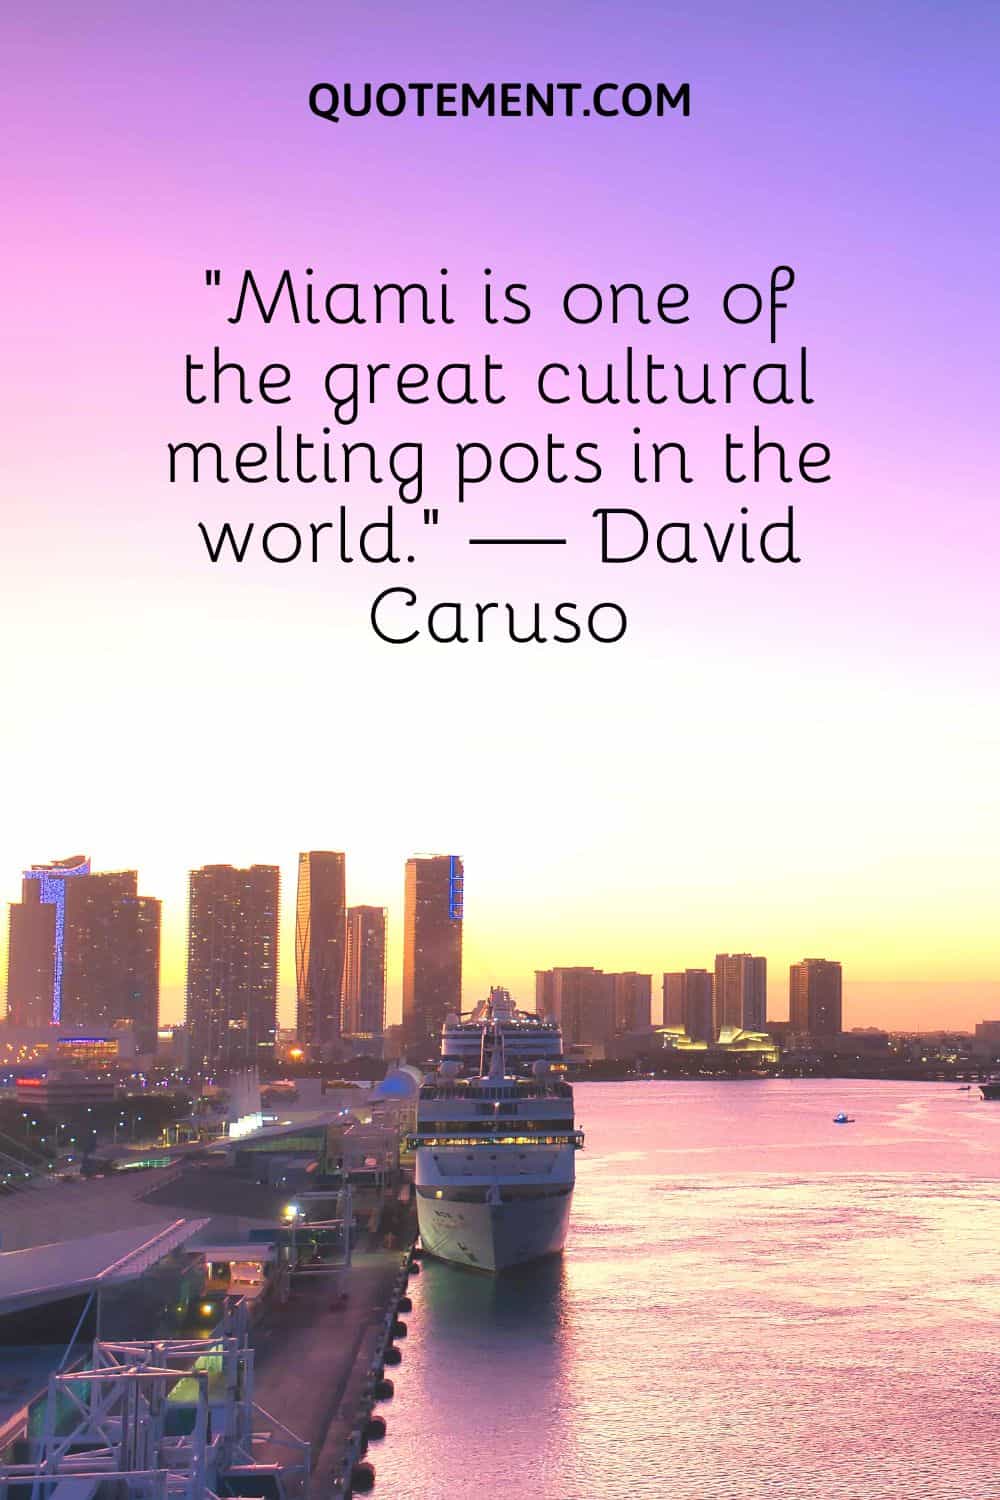 Miami is one of the great cultural melting pots in the world